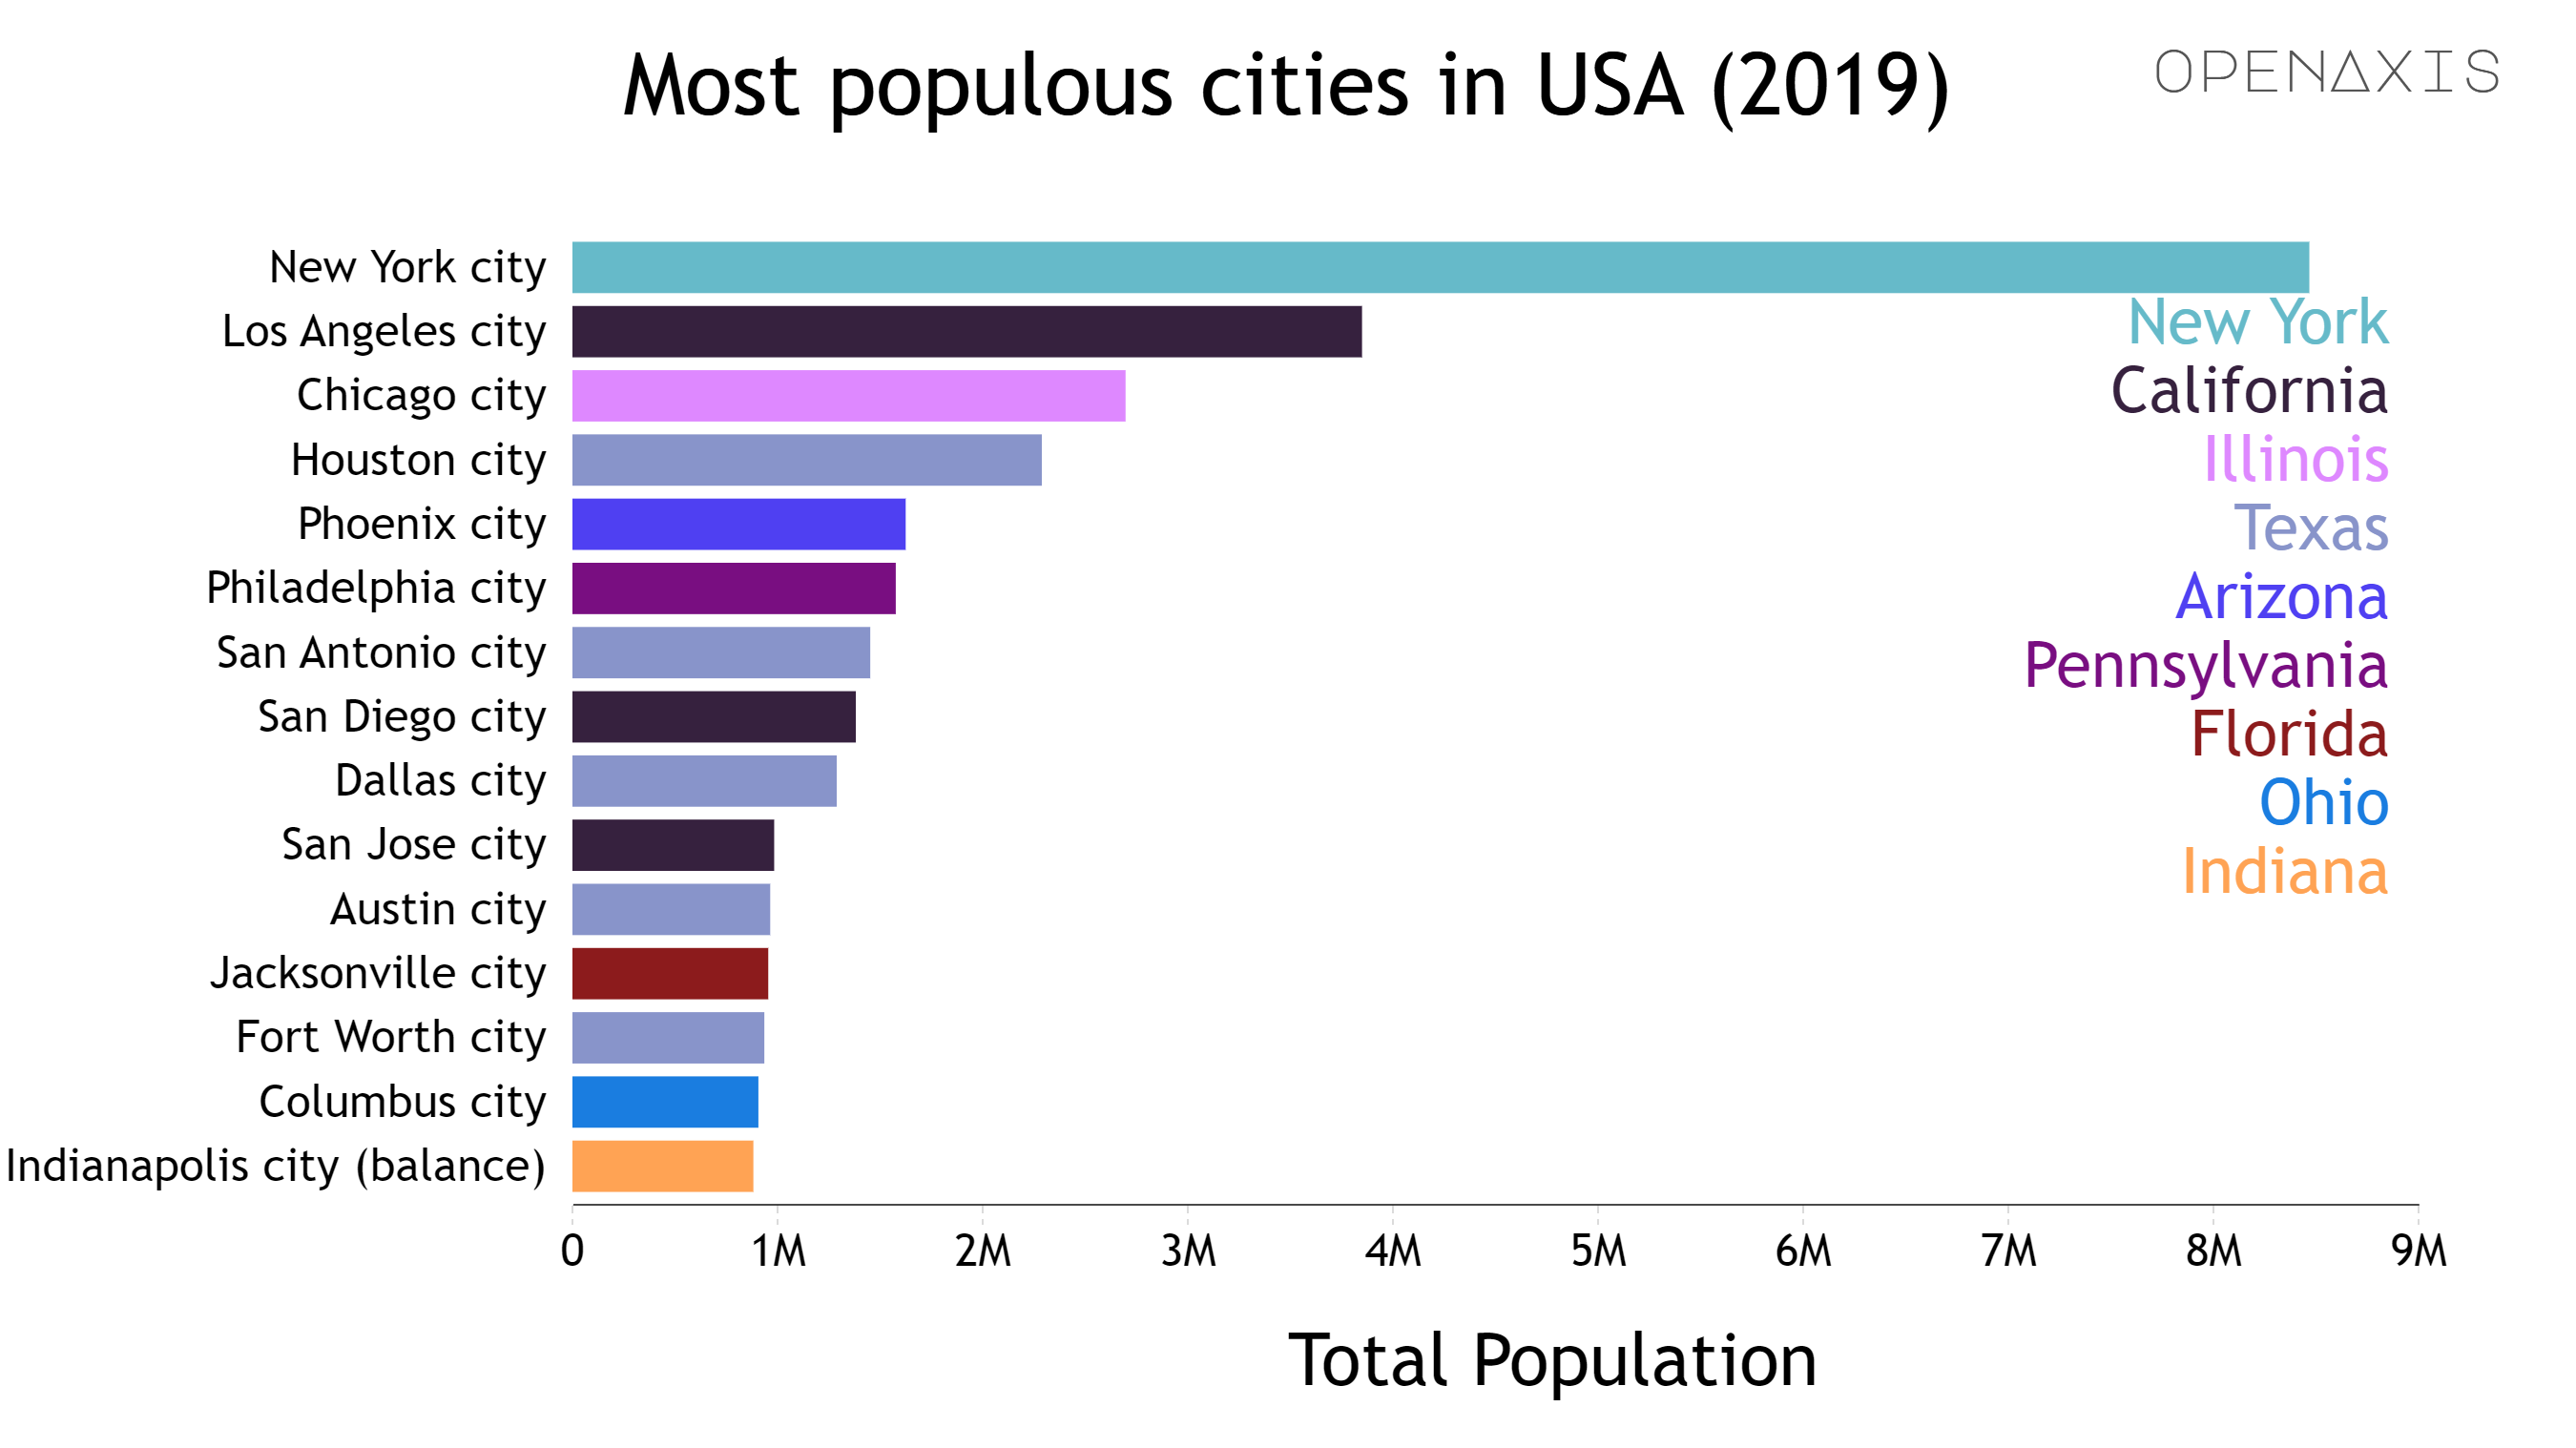 "Most populous cities in USA (2019)"